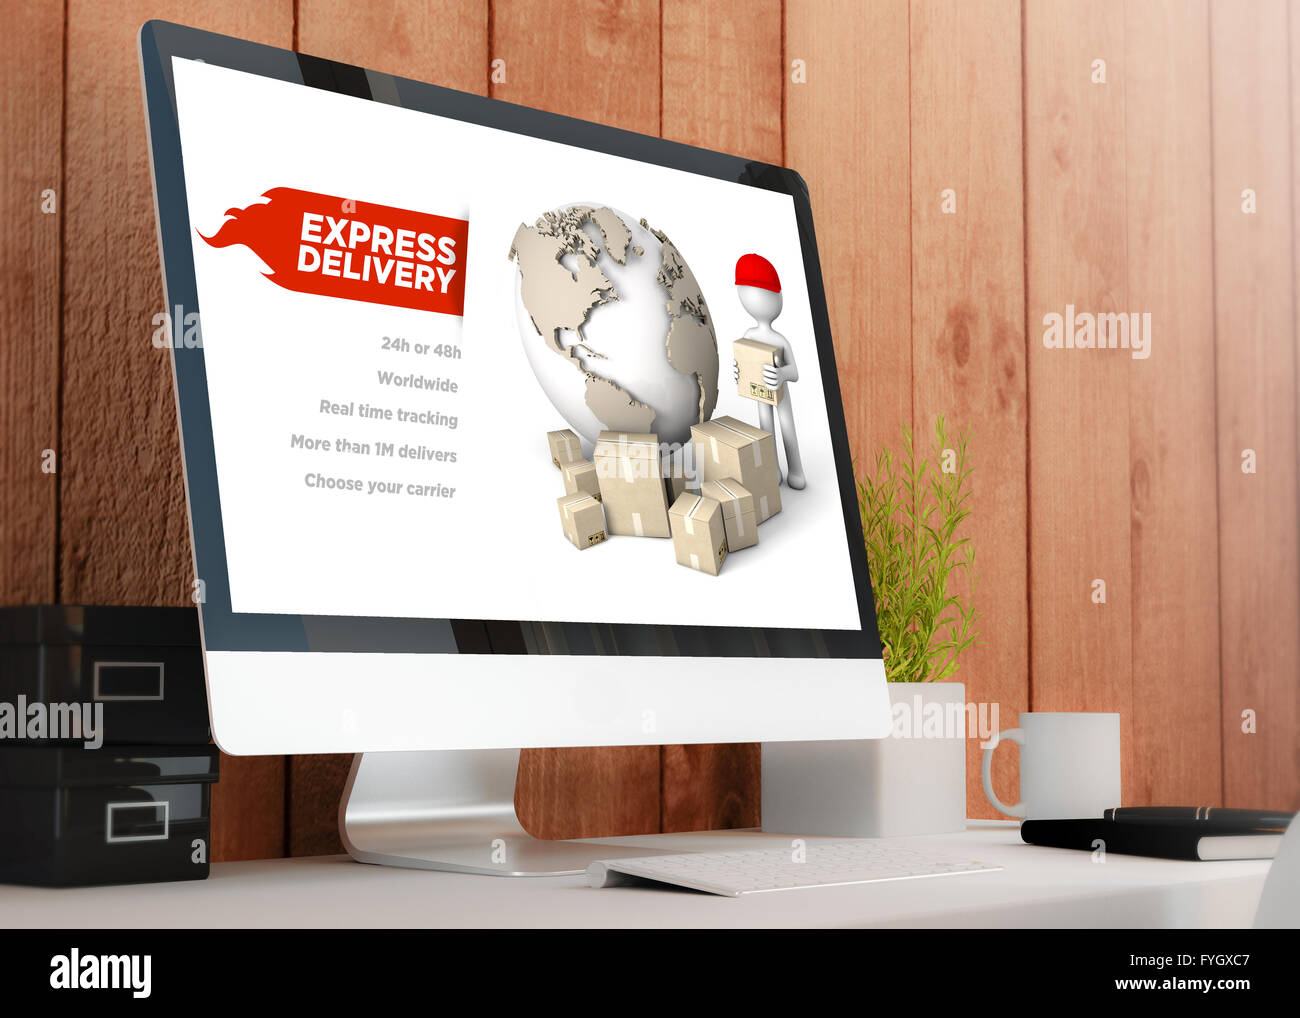 modern wooden workspace with computer showing express delivery website. All screen graphics are made up. 3D illustration. Stock Photo